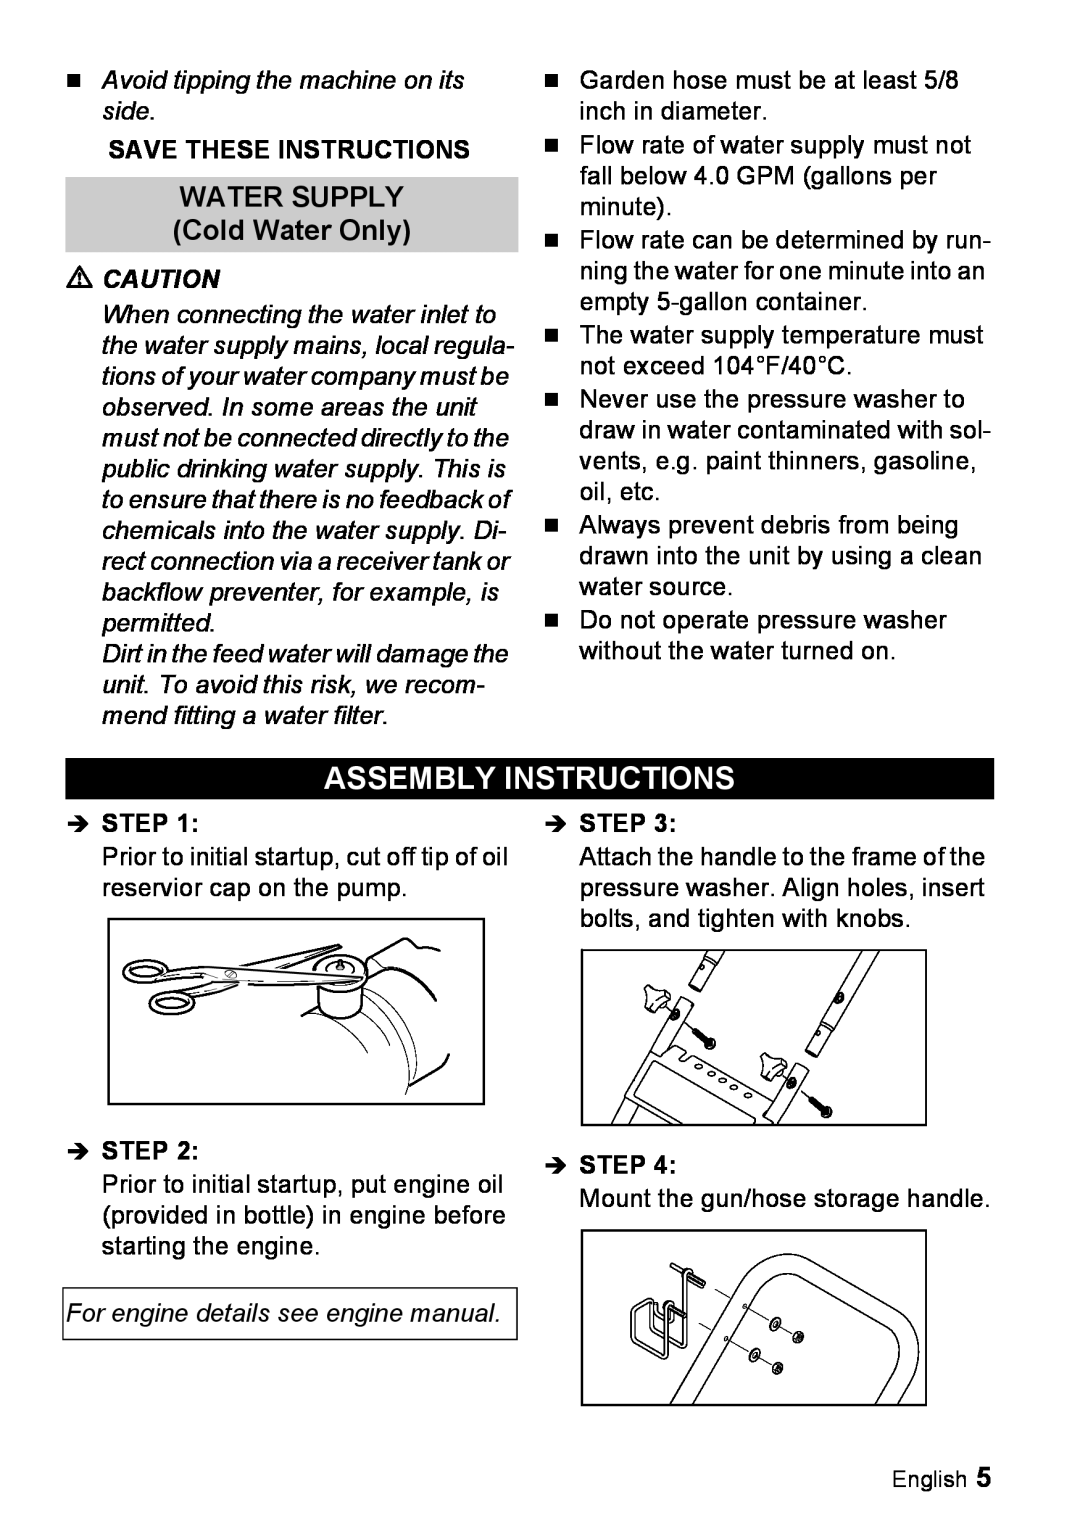 Karcher G 4000 RH manual Assembly Instructions, WATER SUPPLY Cold Water Only 